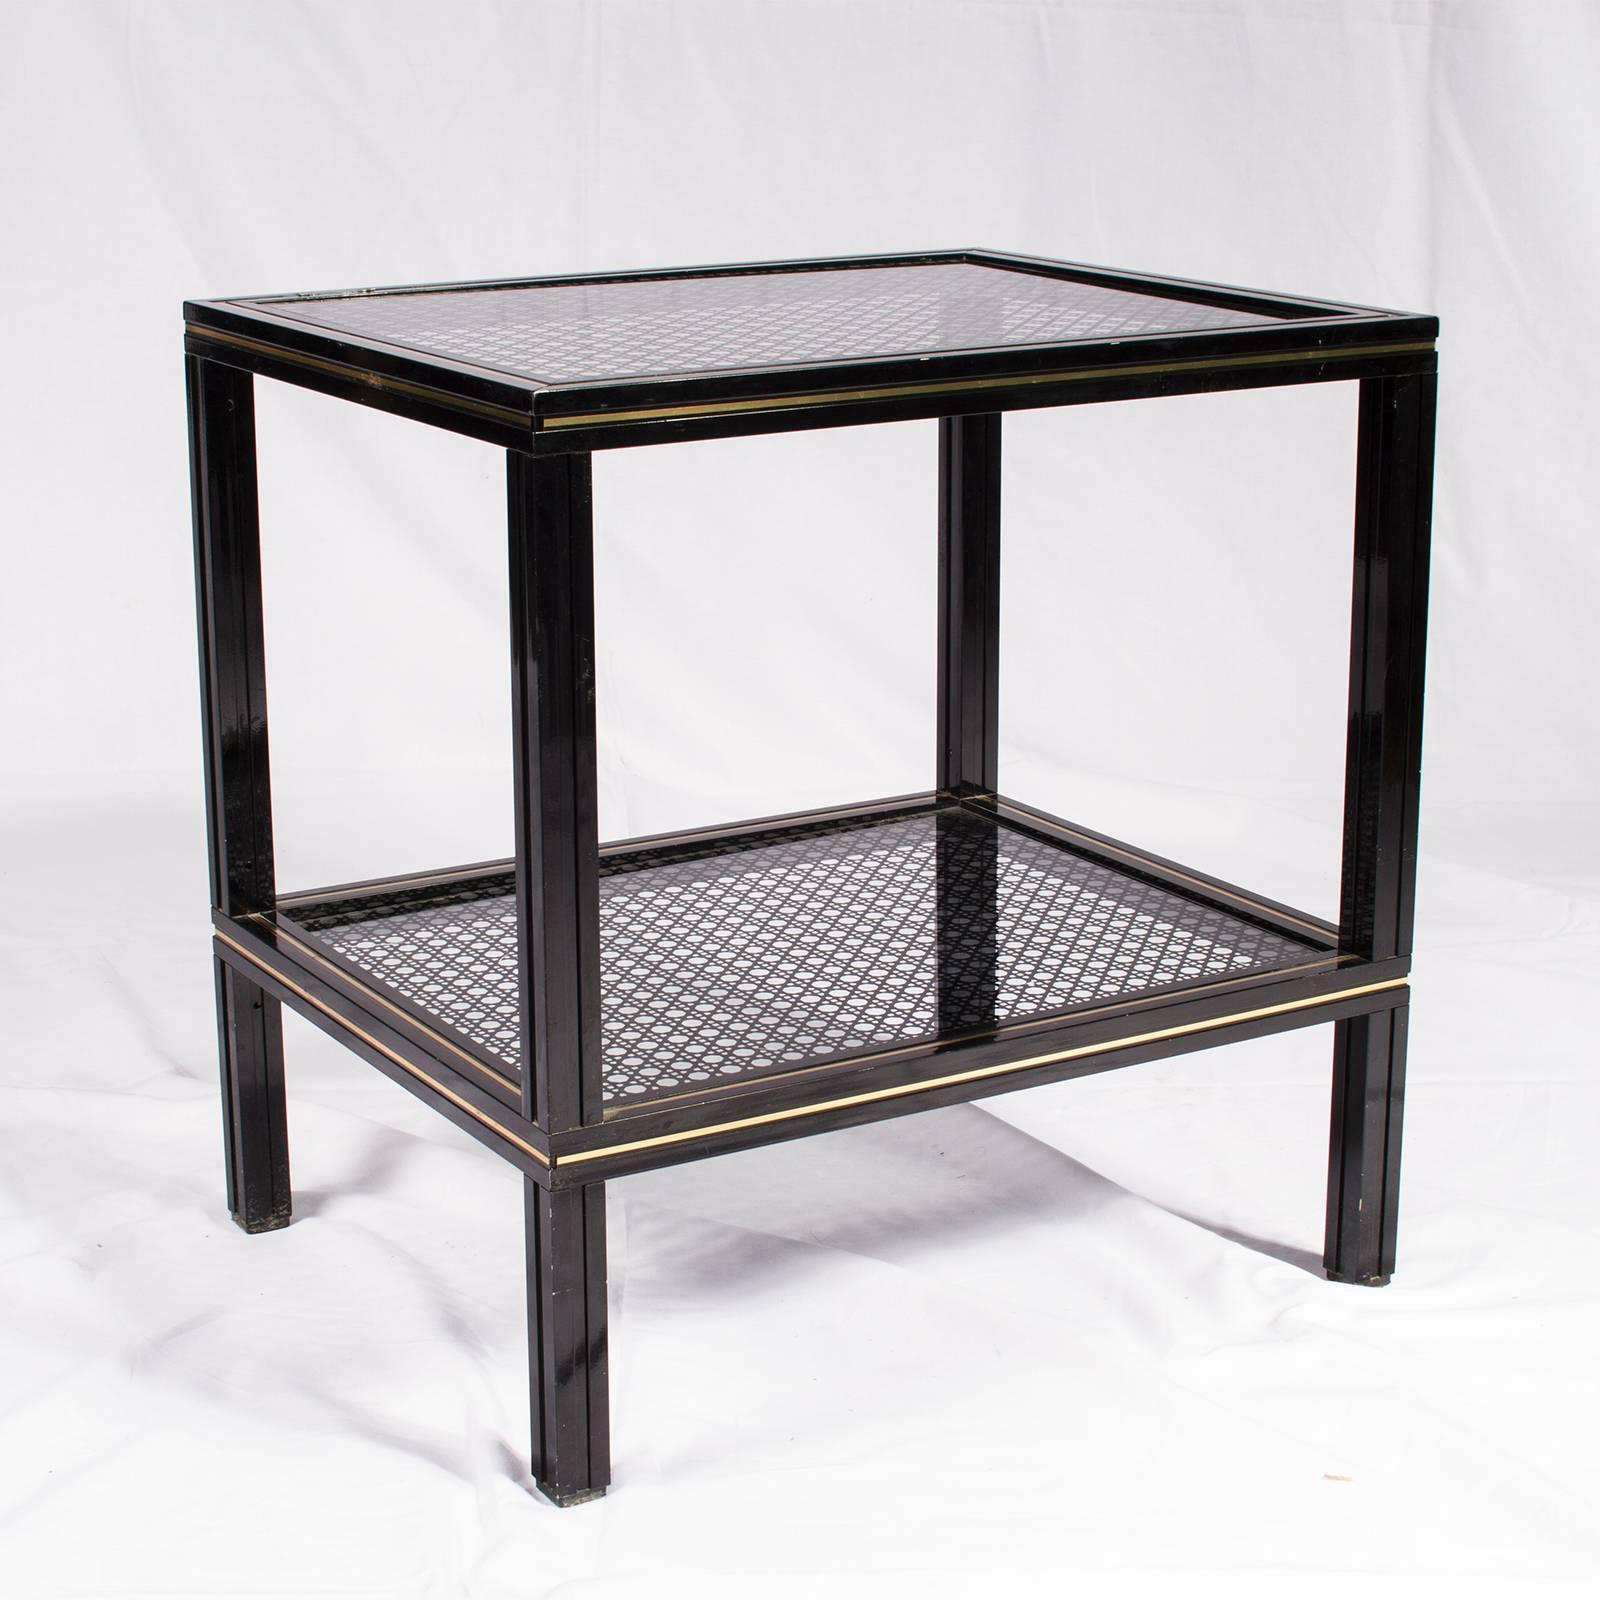 French vintage side table by Pierre Vandel in black lacquered metal with two shelves glass have a cane work pattern applied.